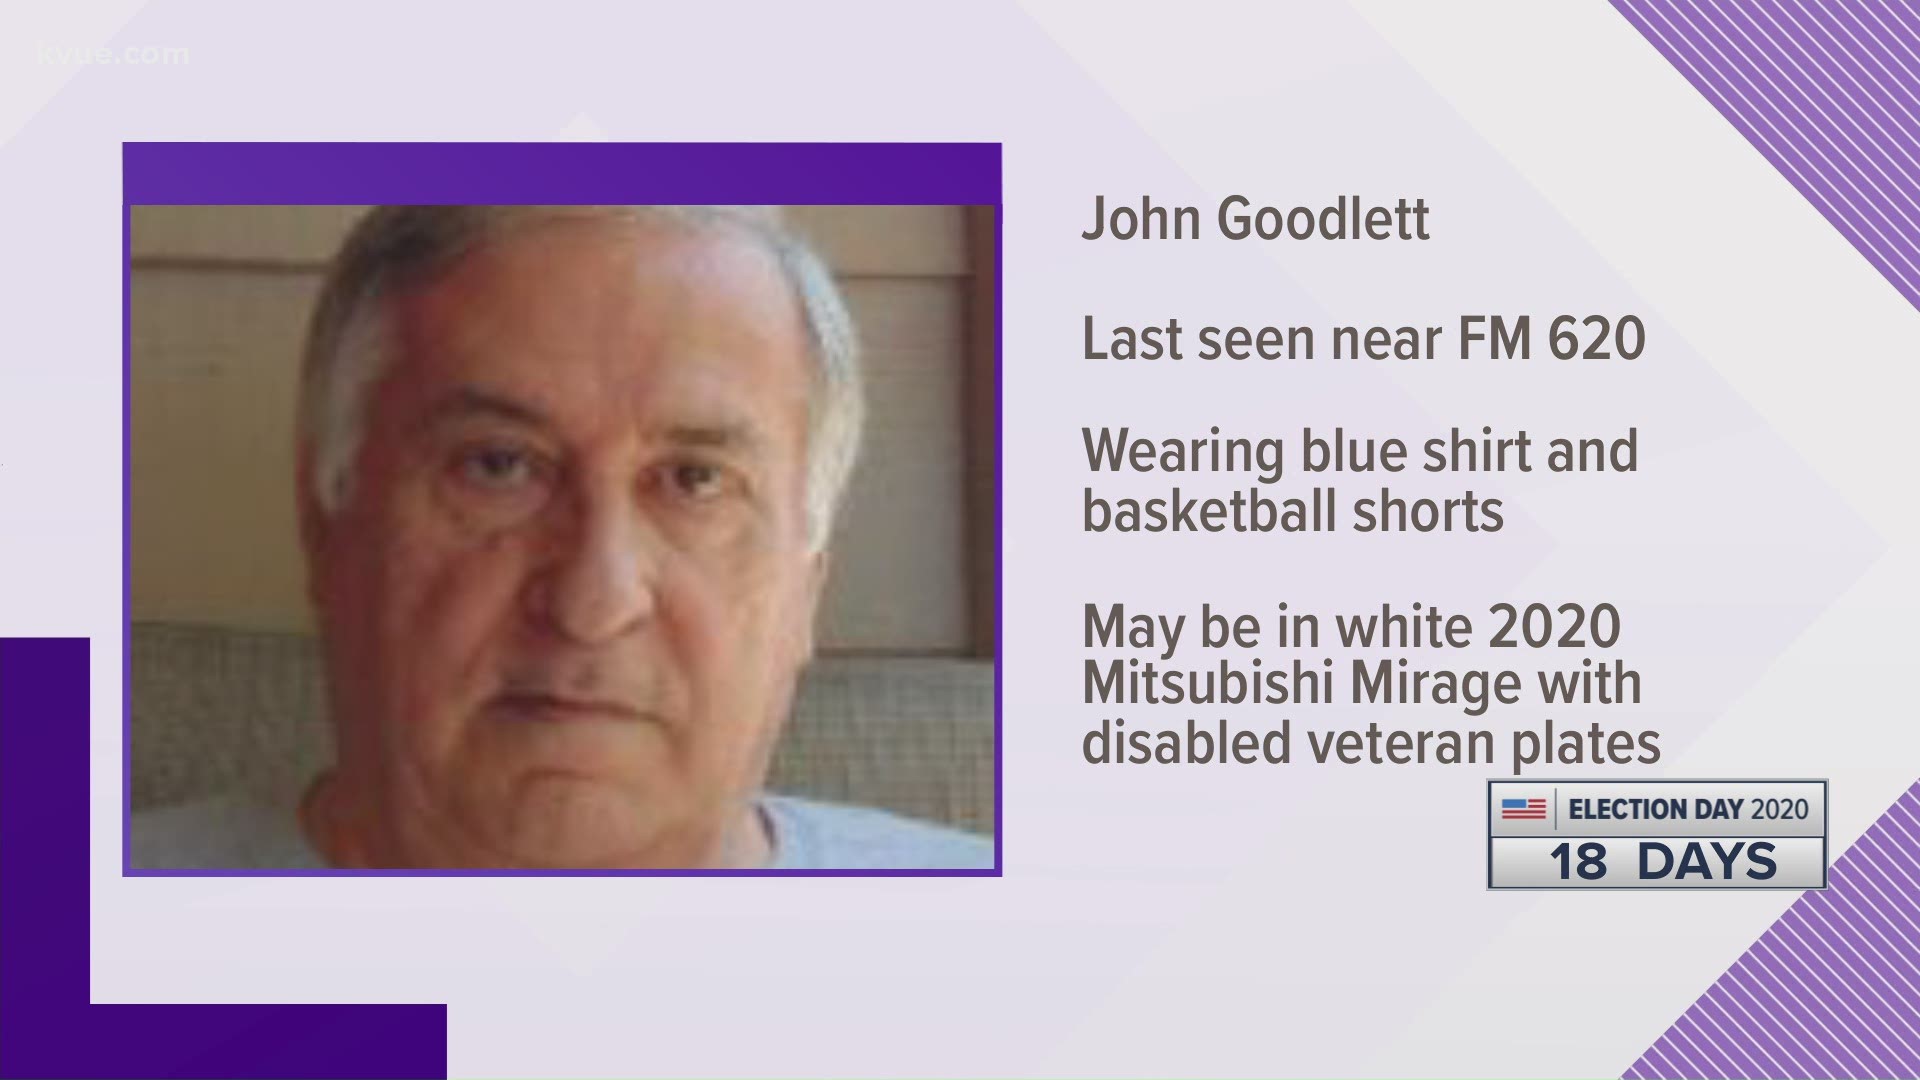 Call APD if you have any information about John Goodlett's disappearance.